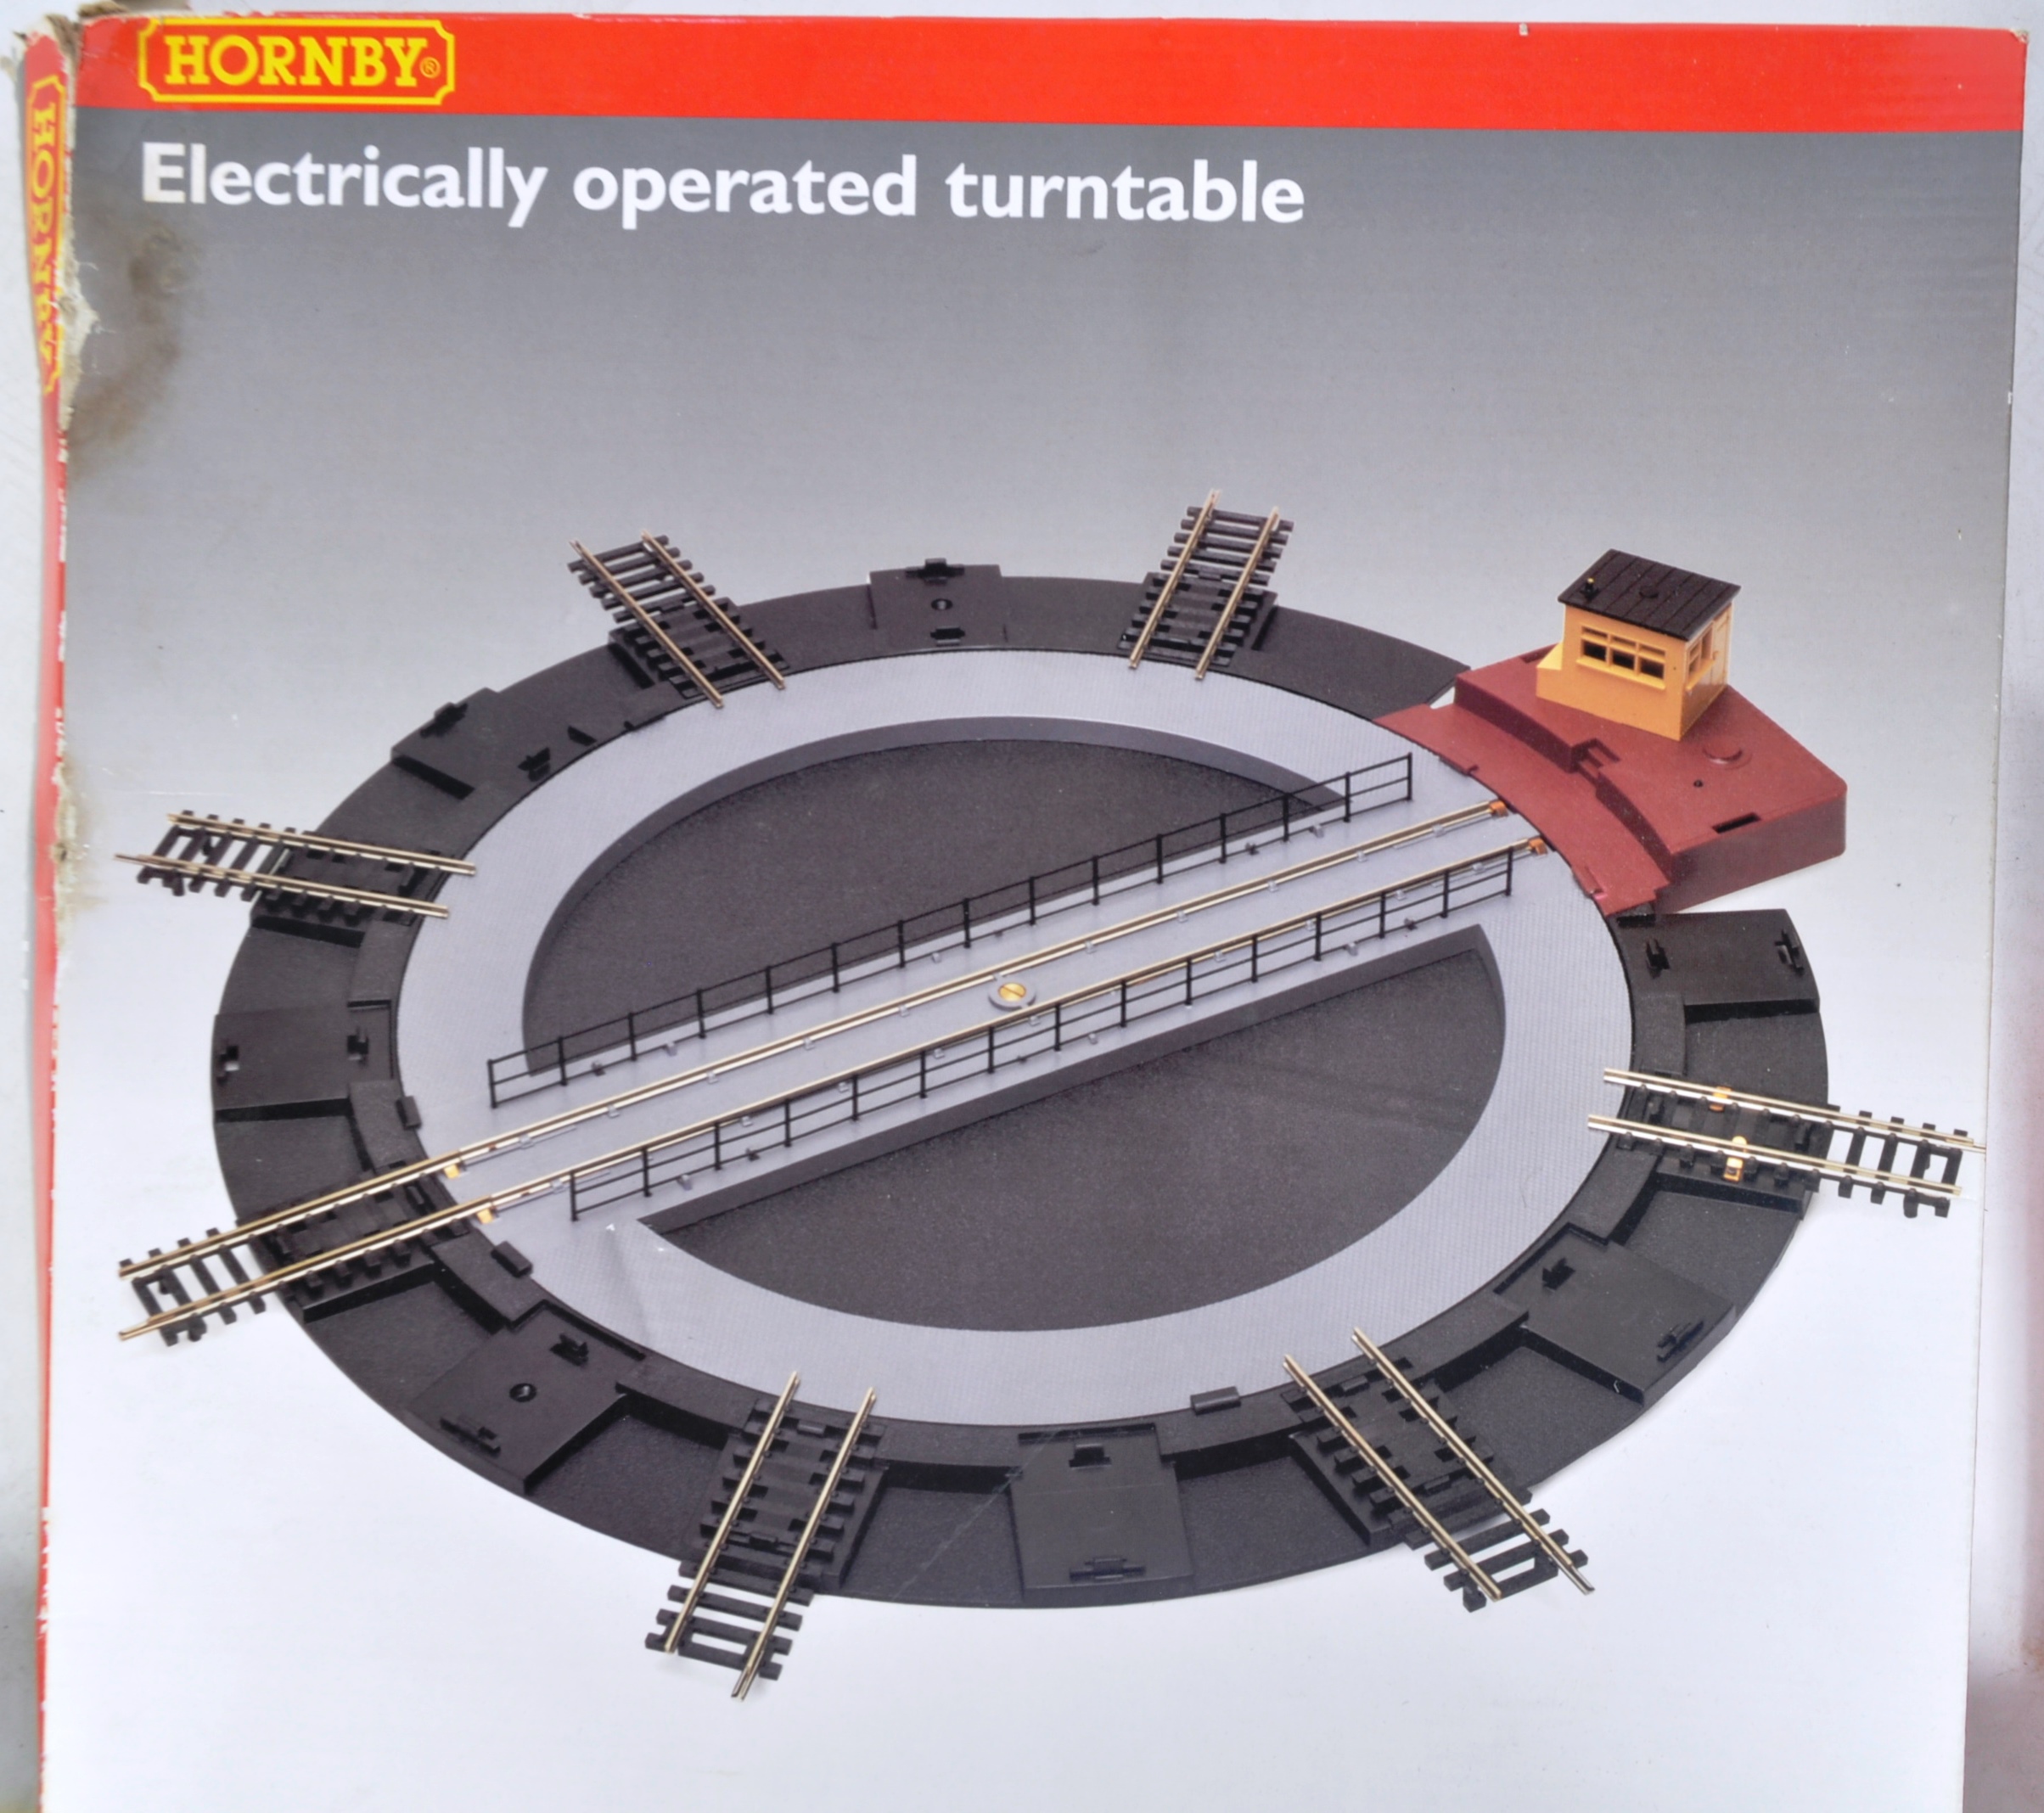 LARGE COLLECTION OF HORNBY 00 GAUGE MODEL RAILWAY ACCESSORIES - Image 6 of 6